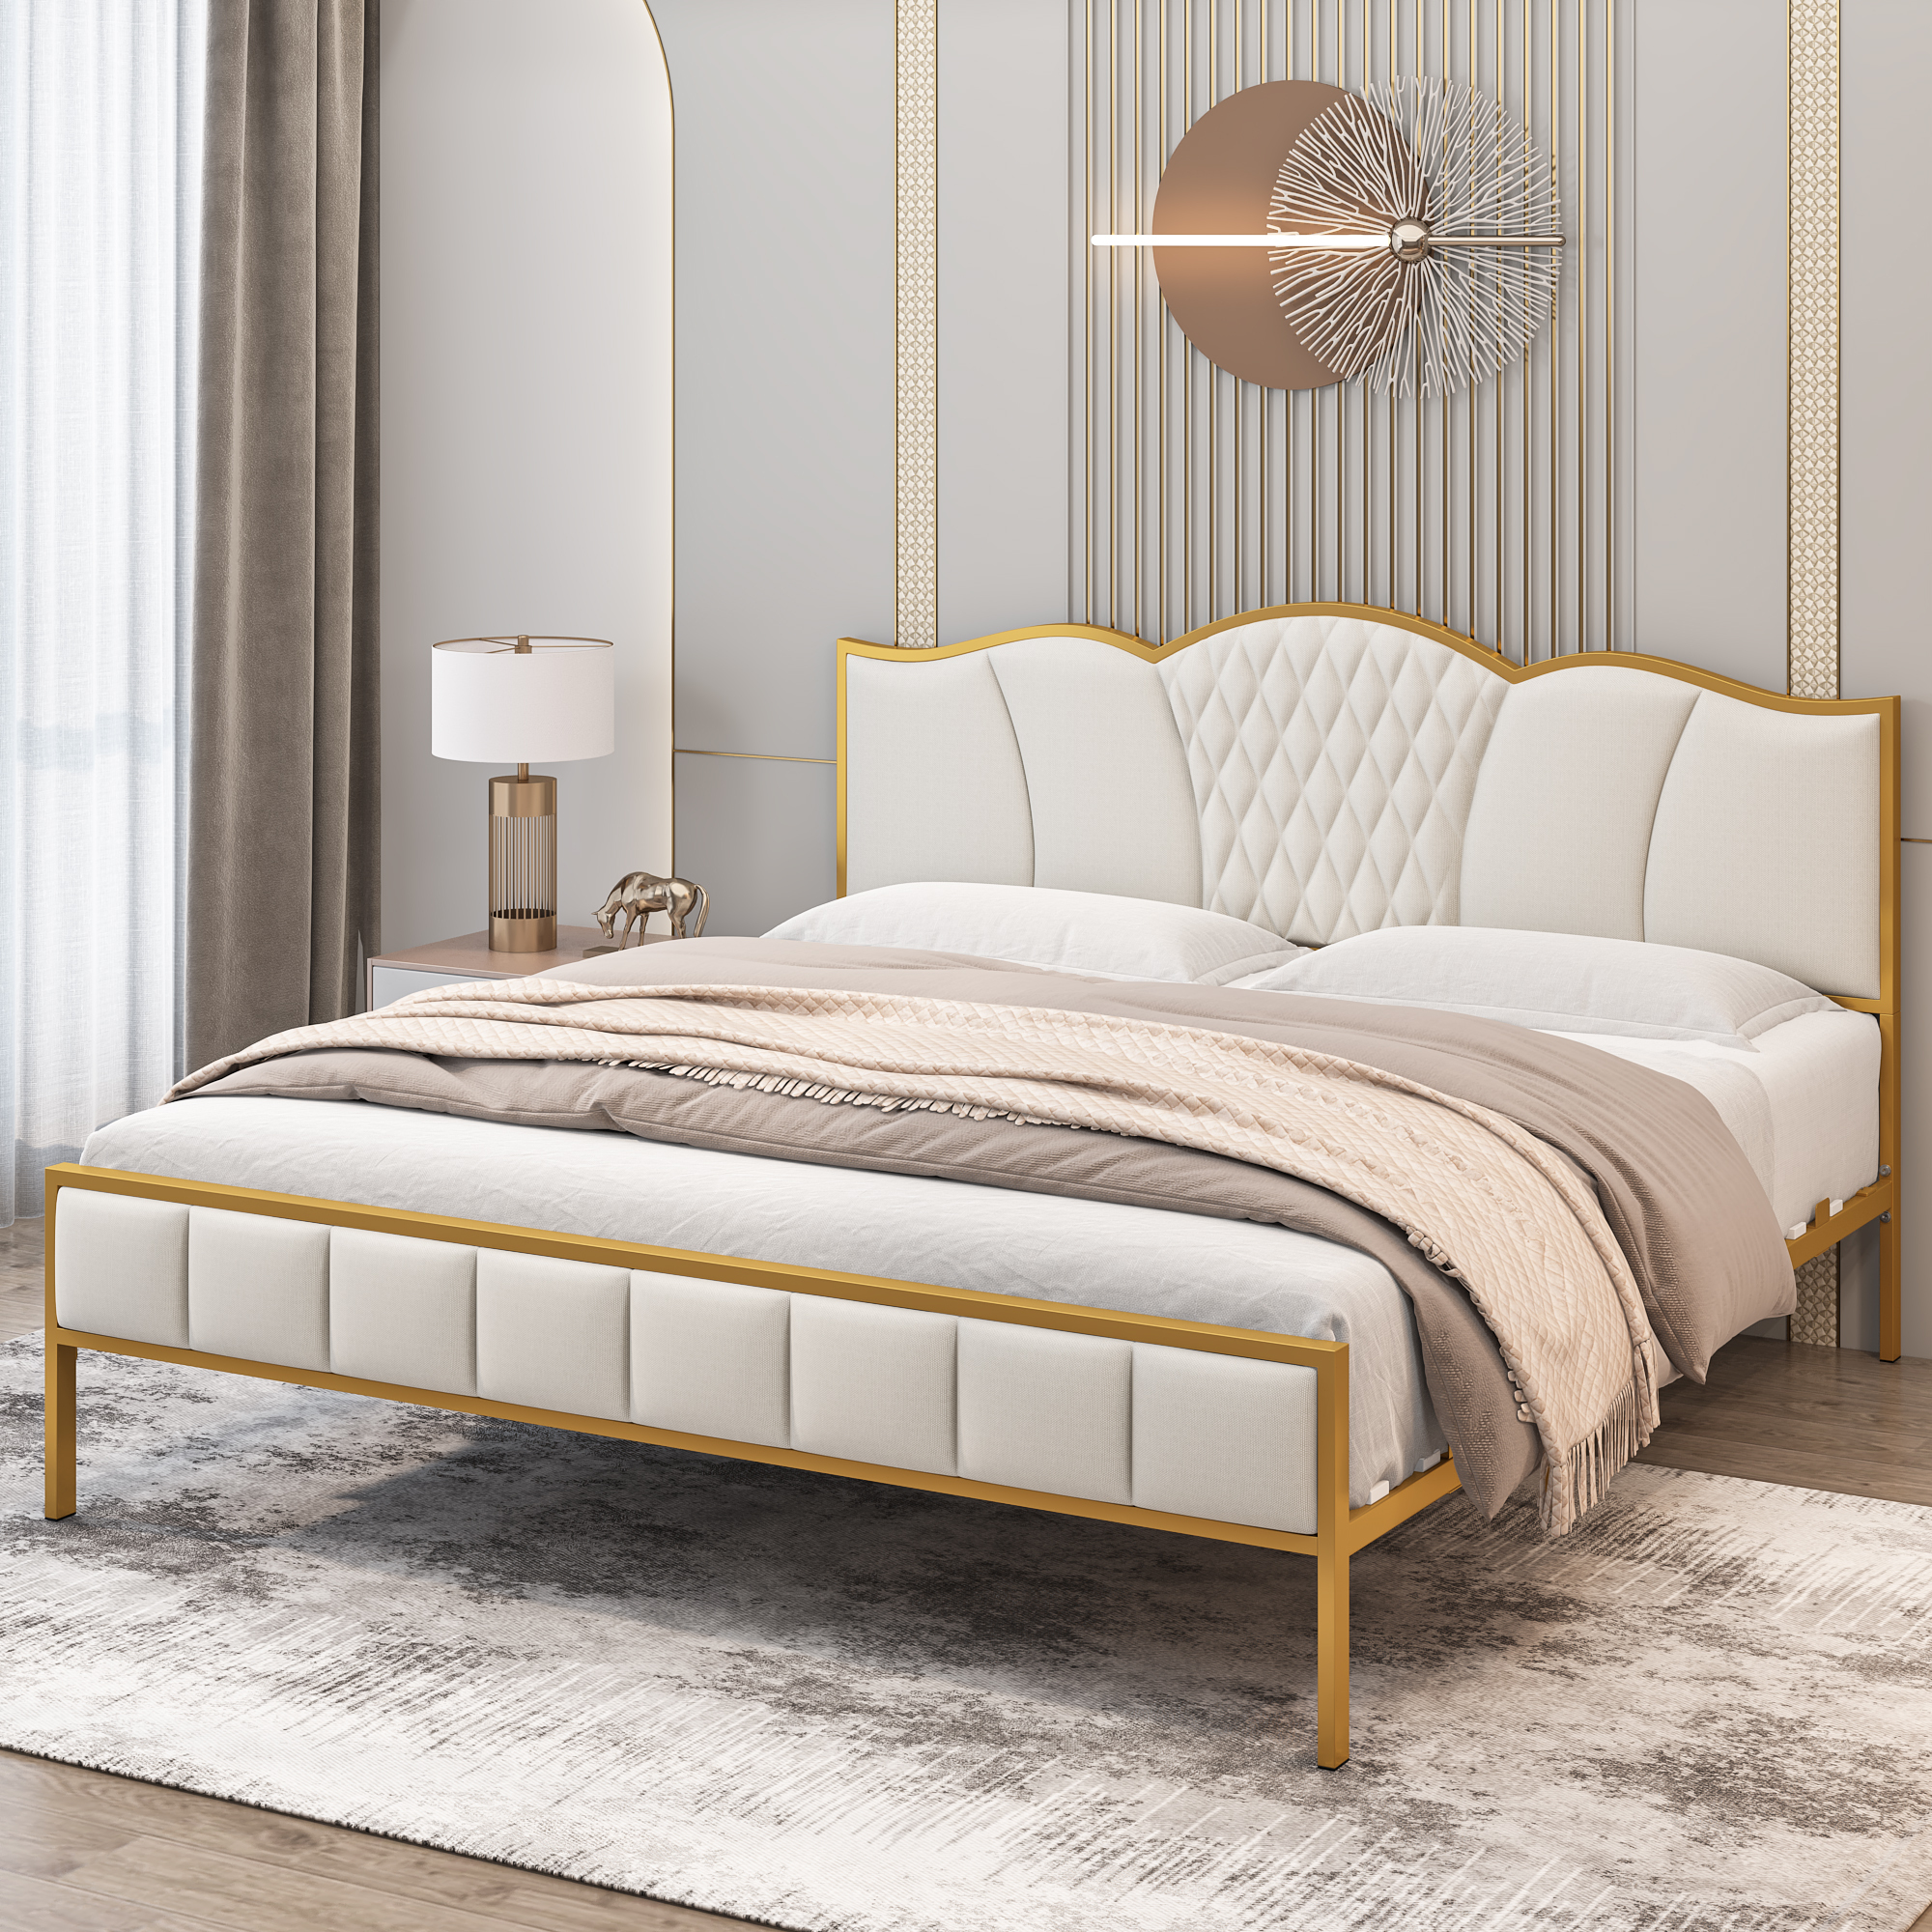 Homfa King Size Metal Bed Frame, Modern Linen Fabric Upholstered Platform Bed Frame with Tufted Headboard, Beige and Gold - image 1 of 10